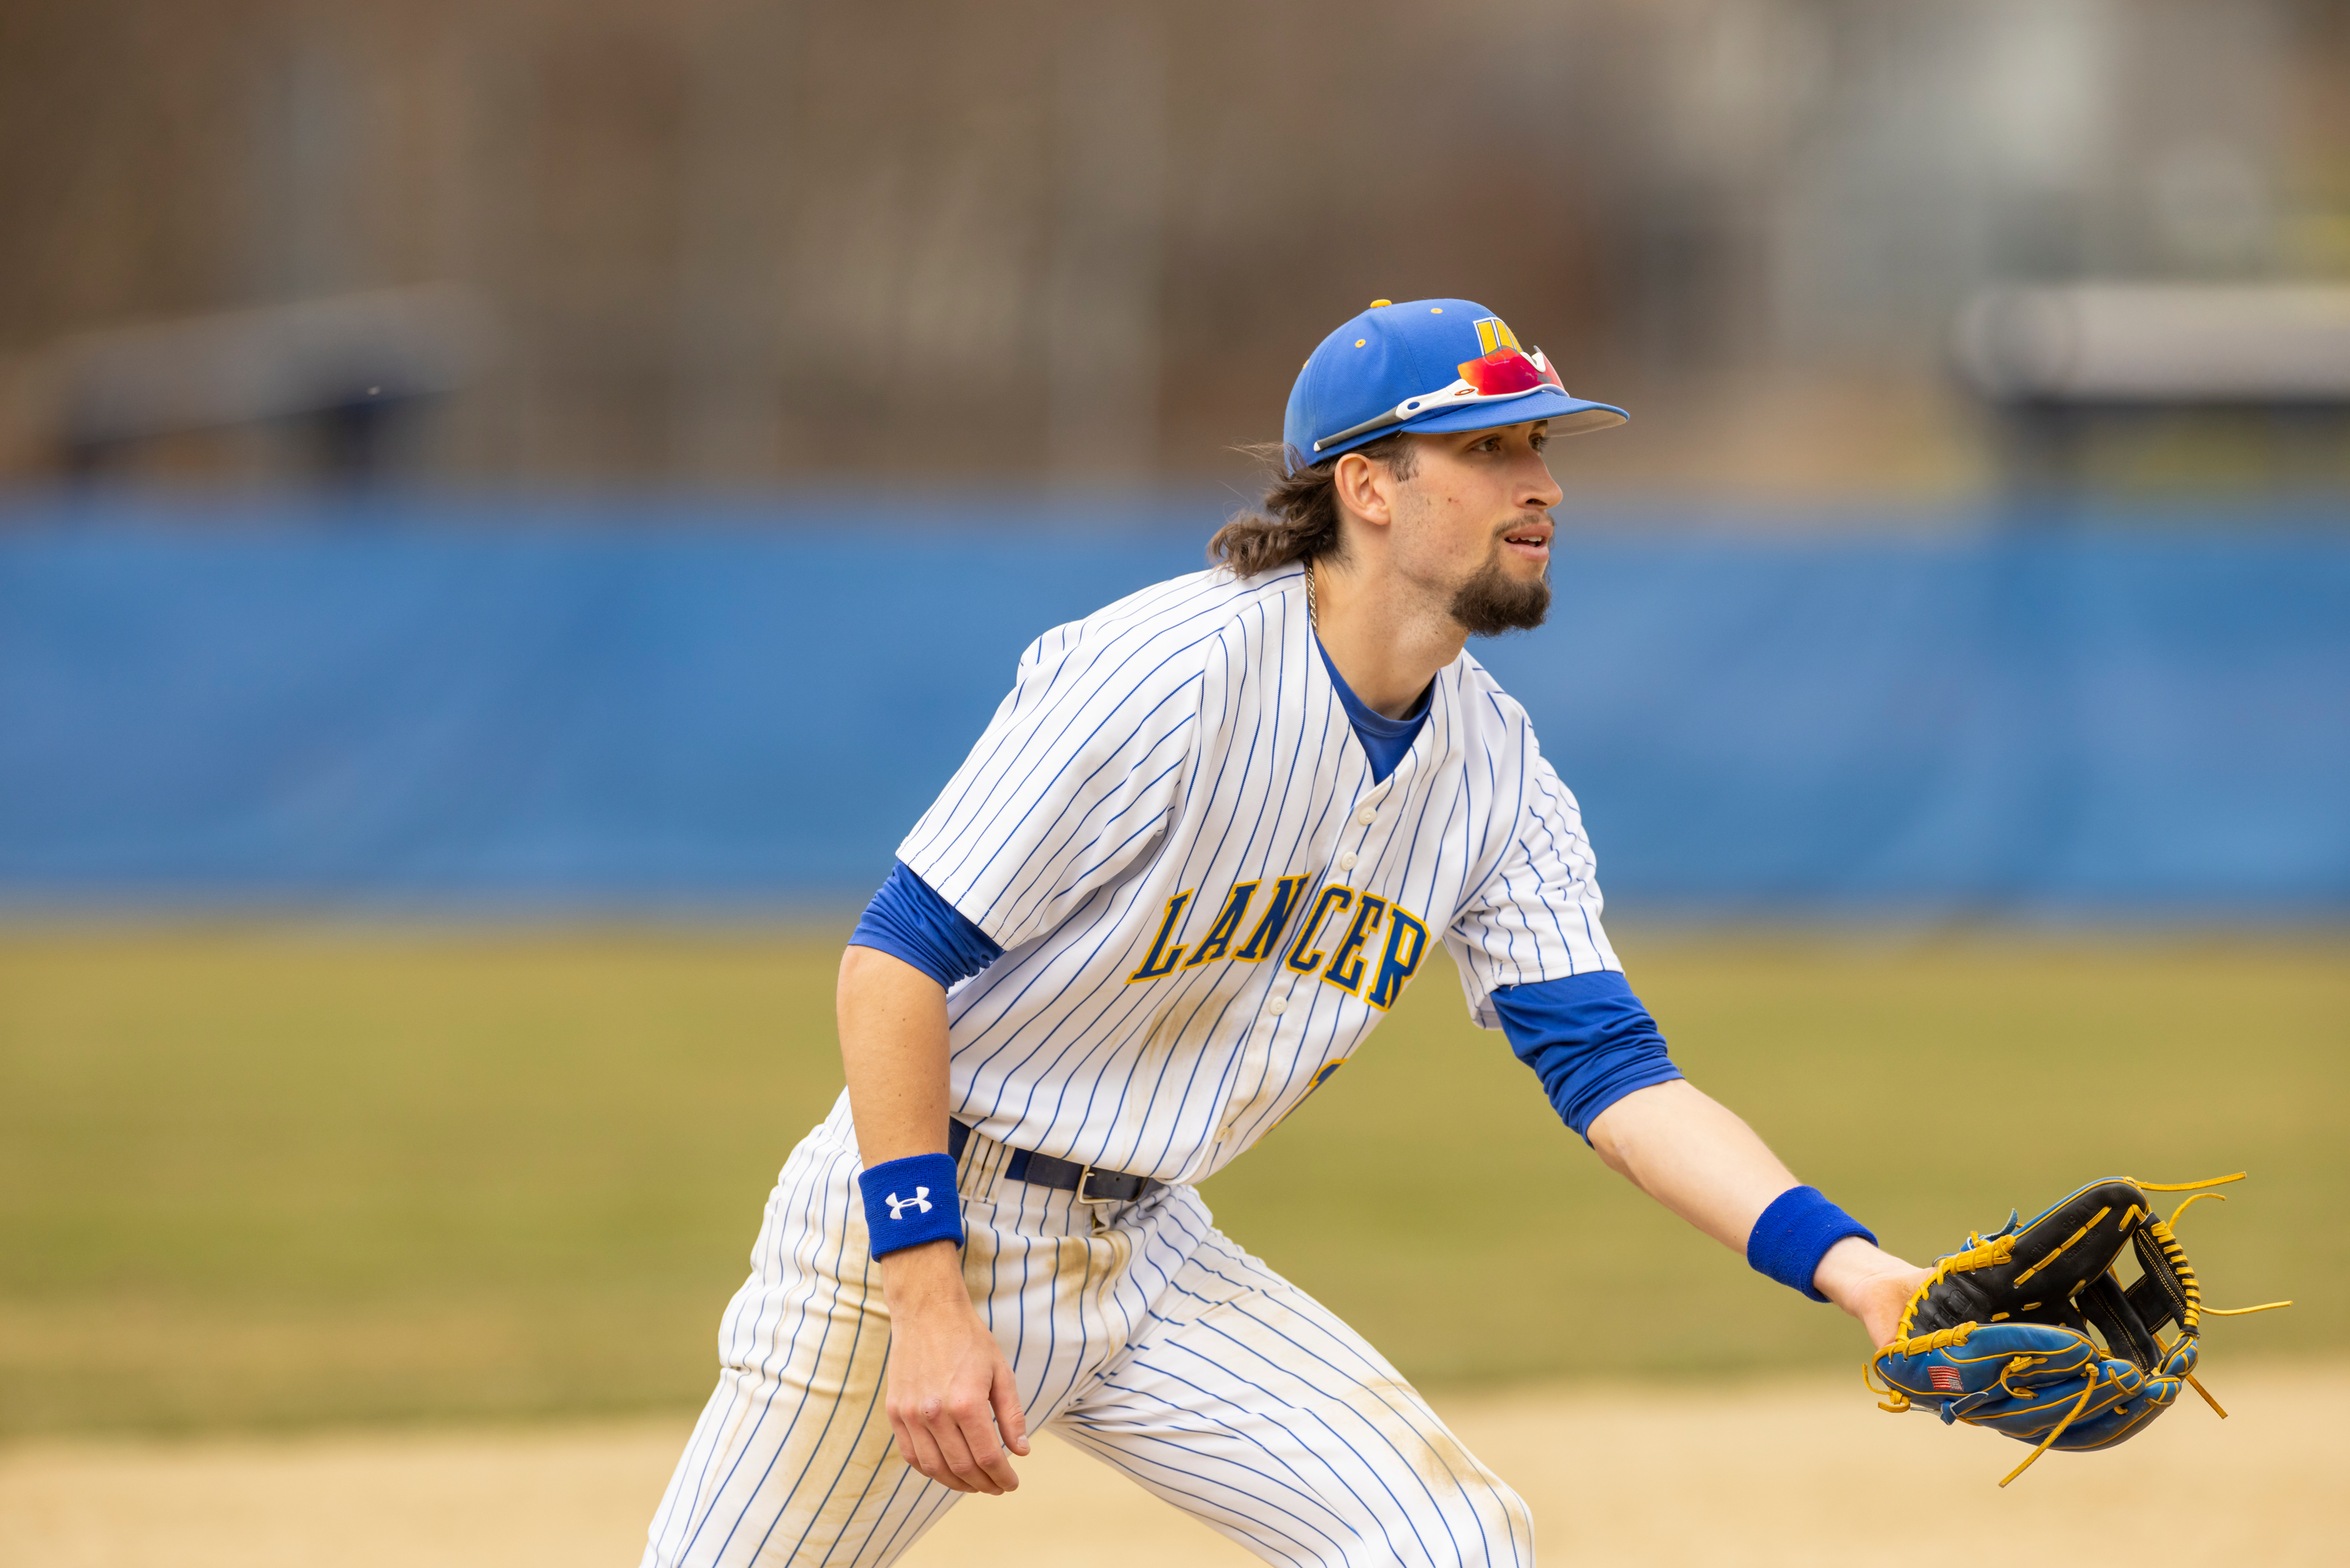 Lancers Falls to Bears in Opening Round of MASCAC Quarterfinals